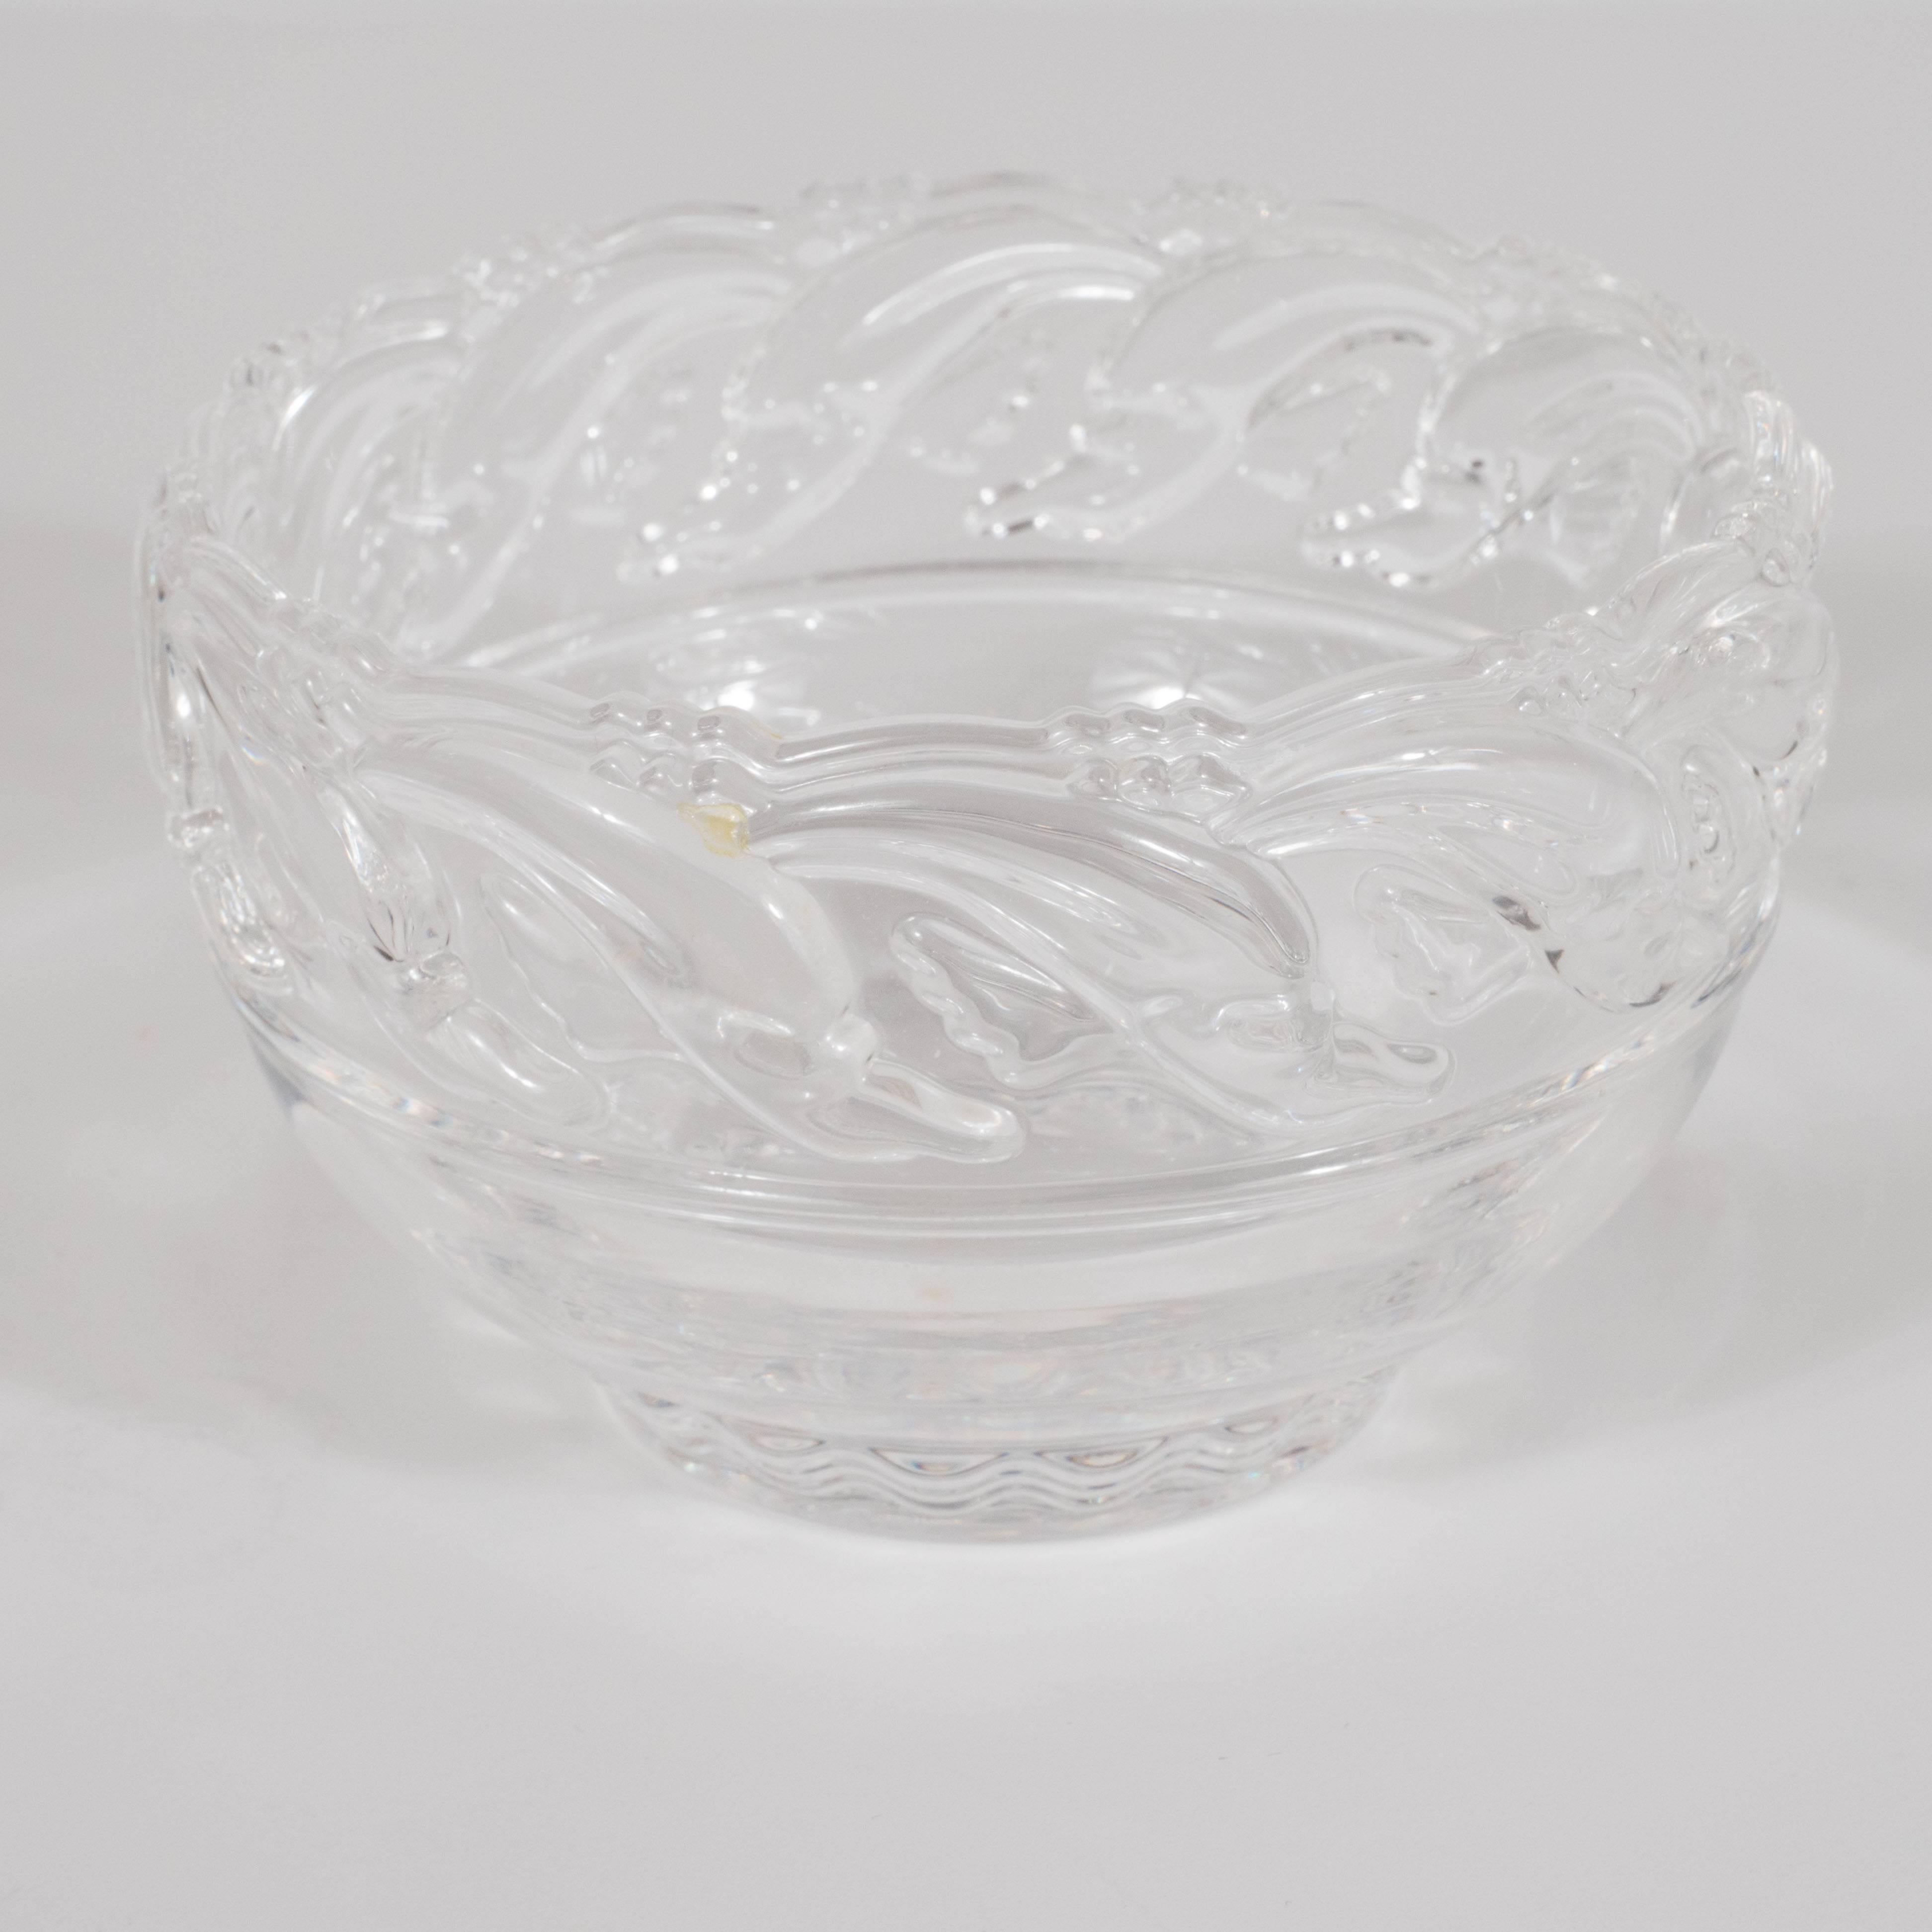 This charming and delightful glass bowl was realized by the renowned American design house, Tiffany & Co., circa 1980. It features stylized renditions of dolphins, in raised glass, riding the crests of waves on the upper portion of the bowl. While